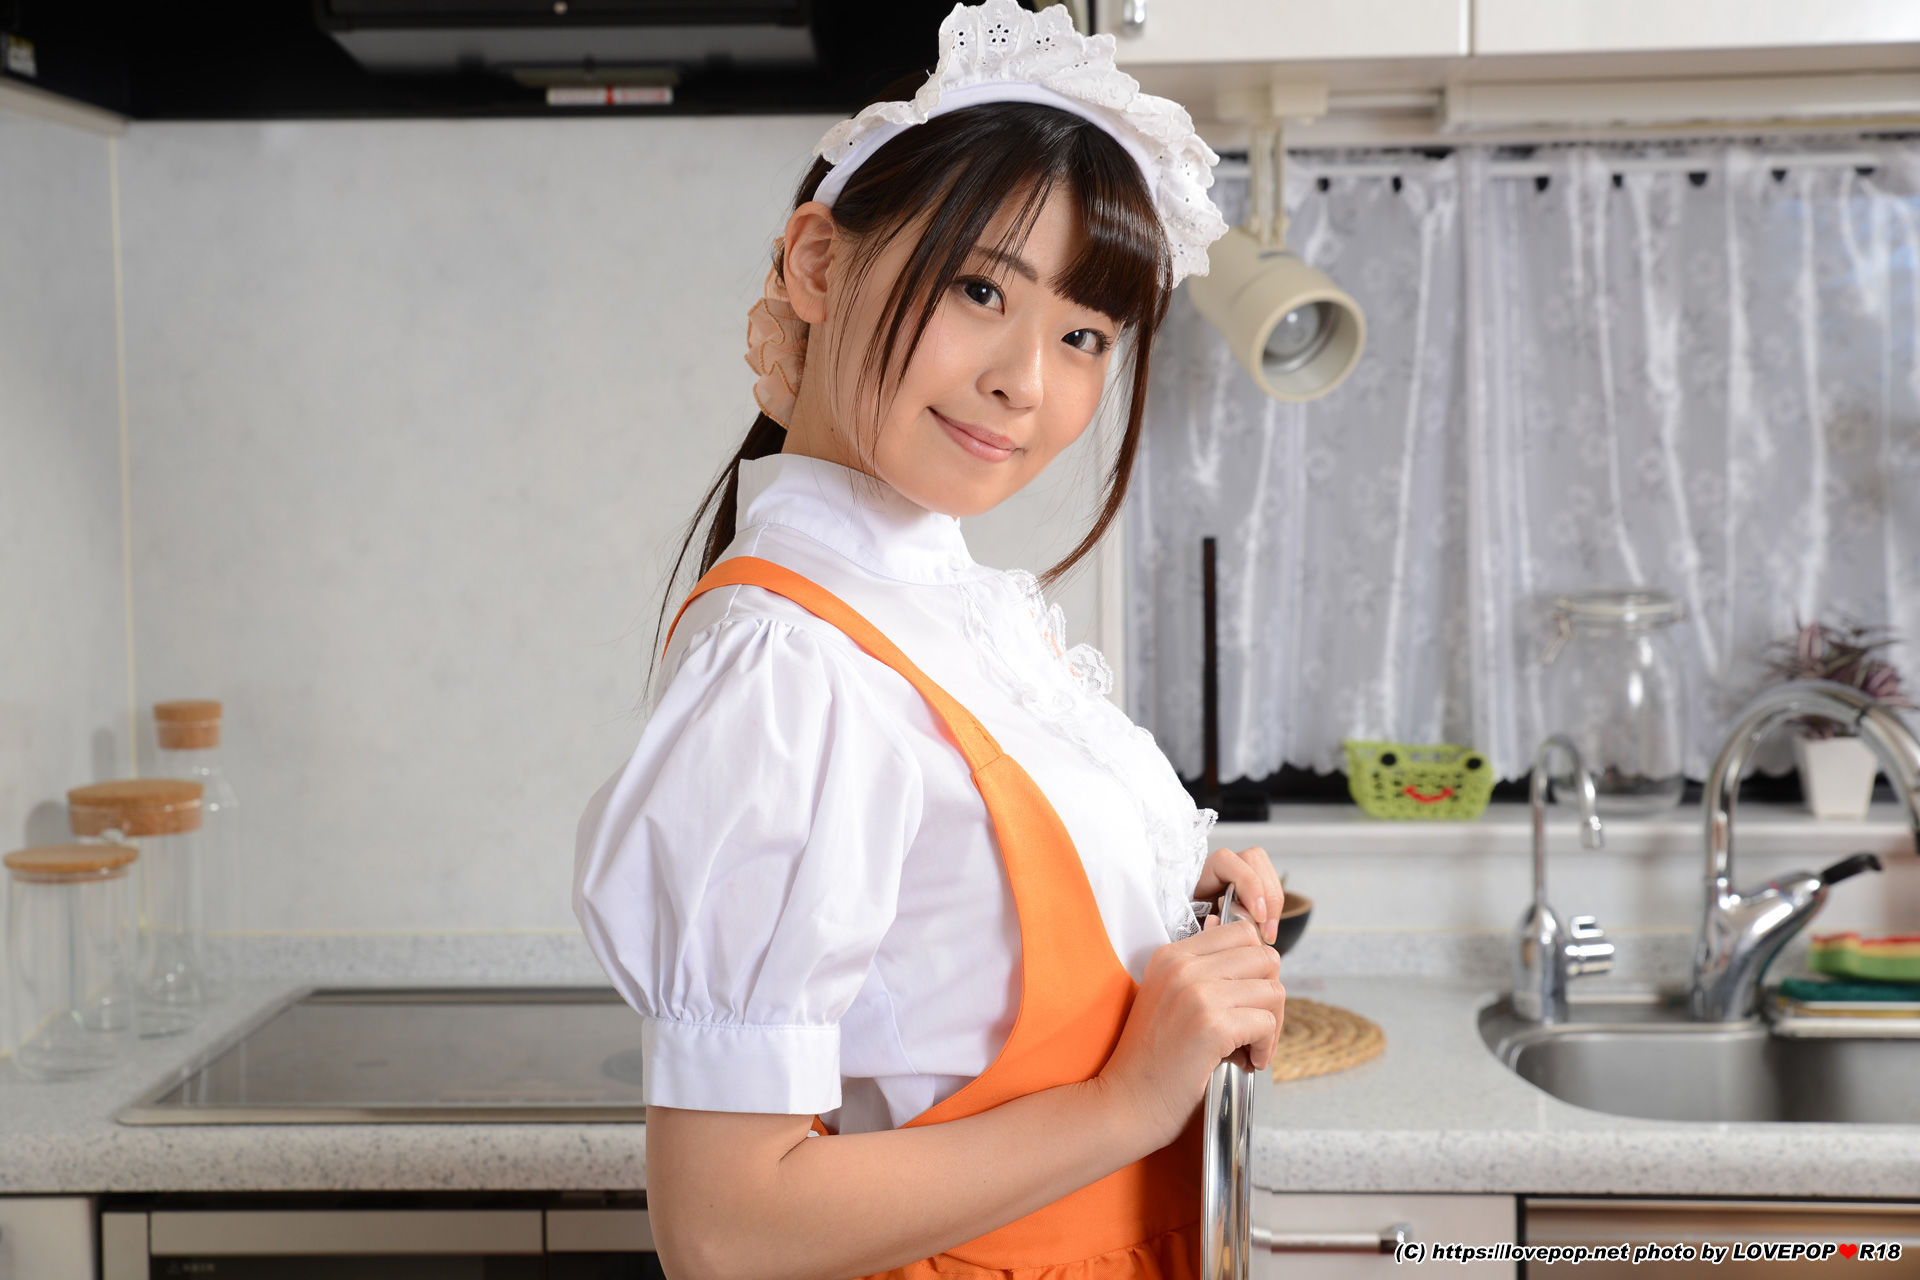 [LOVEPOP] Special Maid Collection - Airi Satou さとう愛理 Photoset 05  第4张